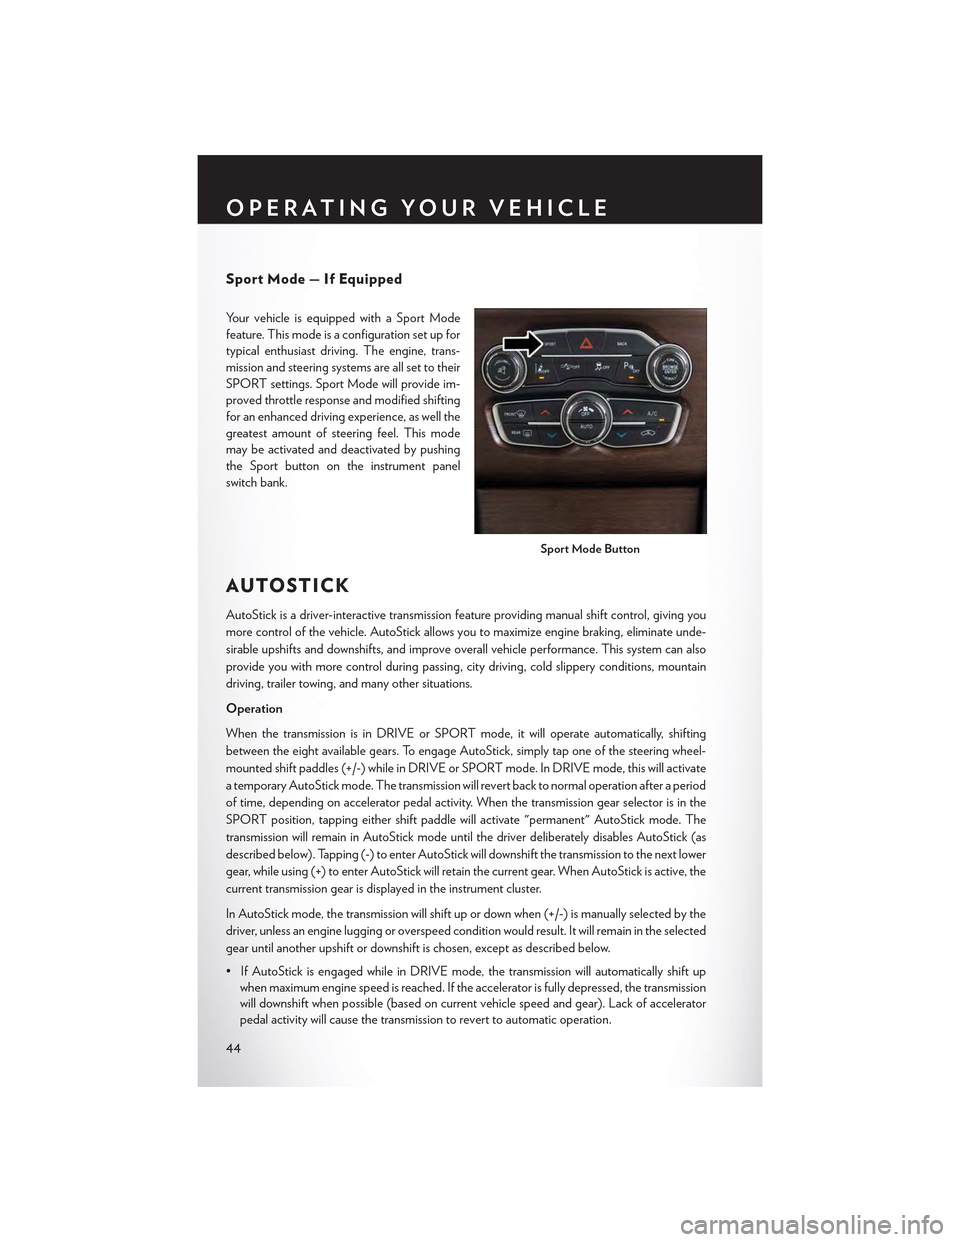 CHRYSLER 300 2015 2.G User Guide Sport Mode — If Equipped
Yo u r v e h i c l e i s e q u i p p e d w i t h a S p o r t M o d e
feature. This mode is a configuration set up for
typical enthusiast driving. The engine, trans-
mission 